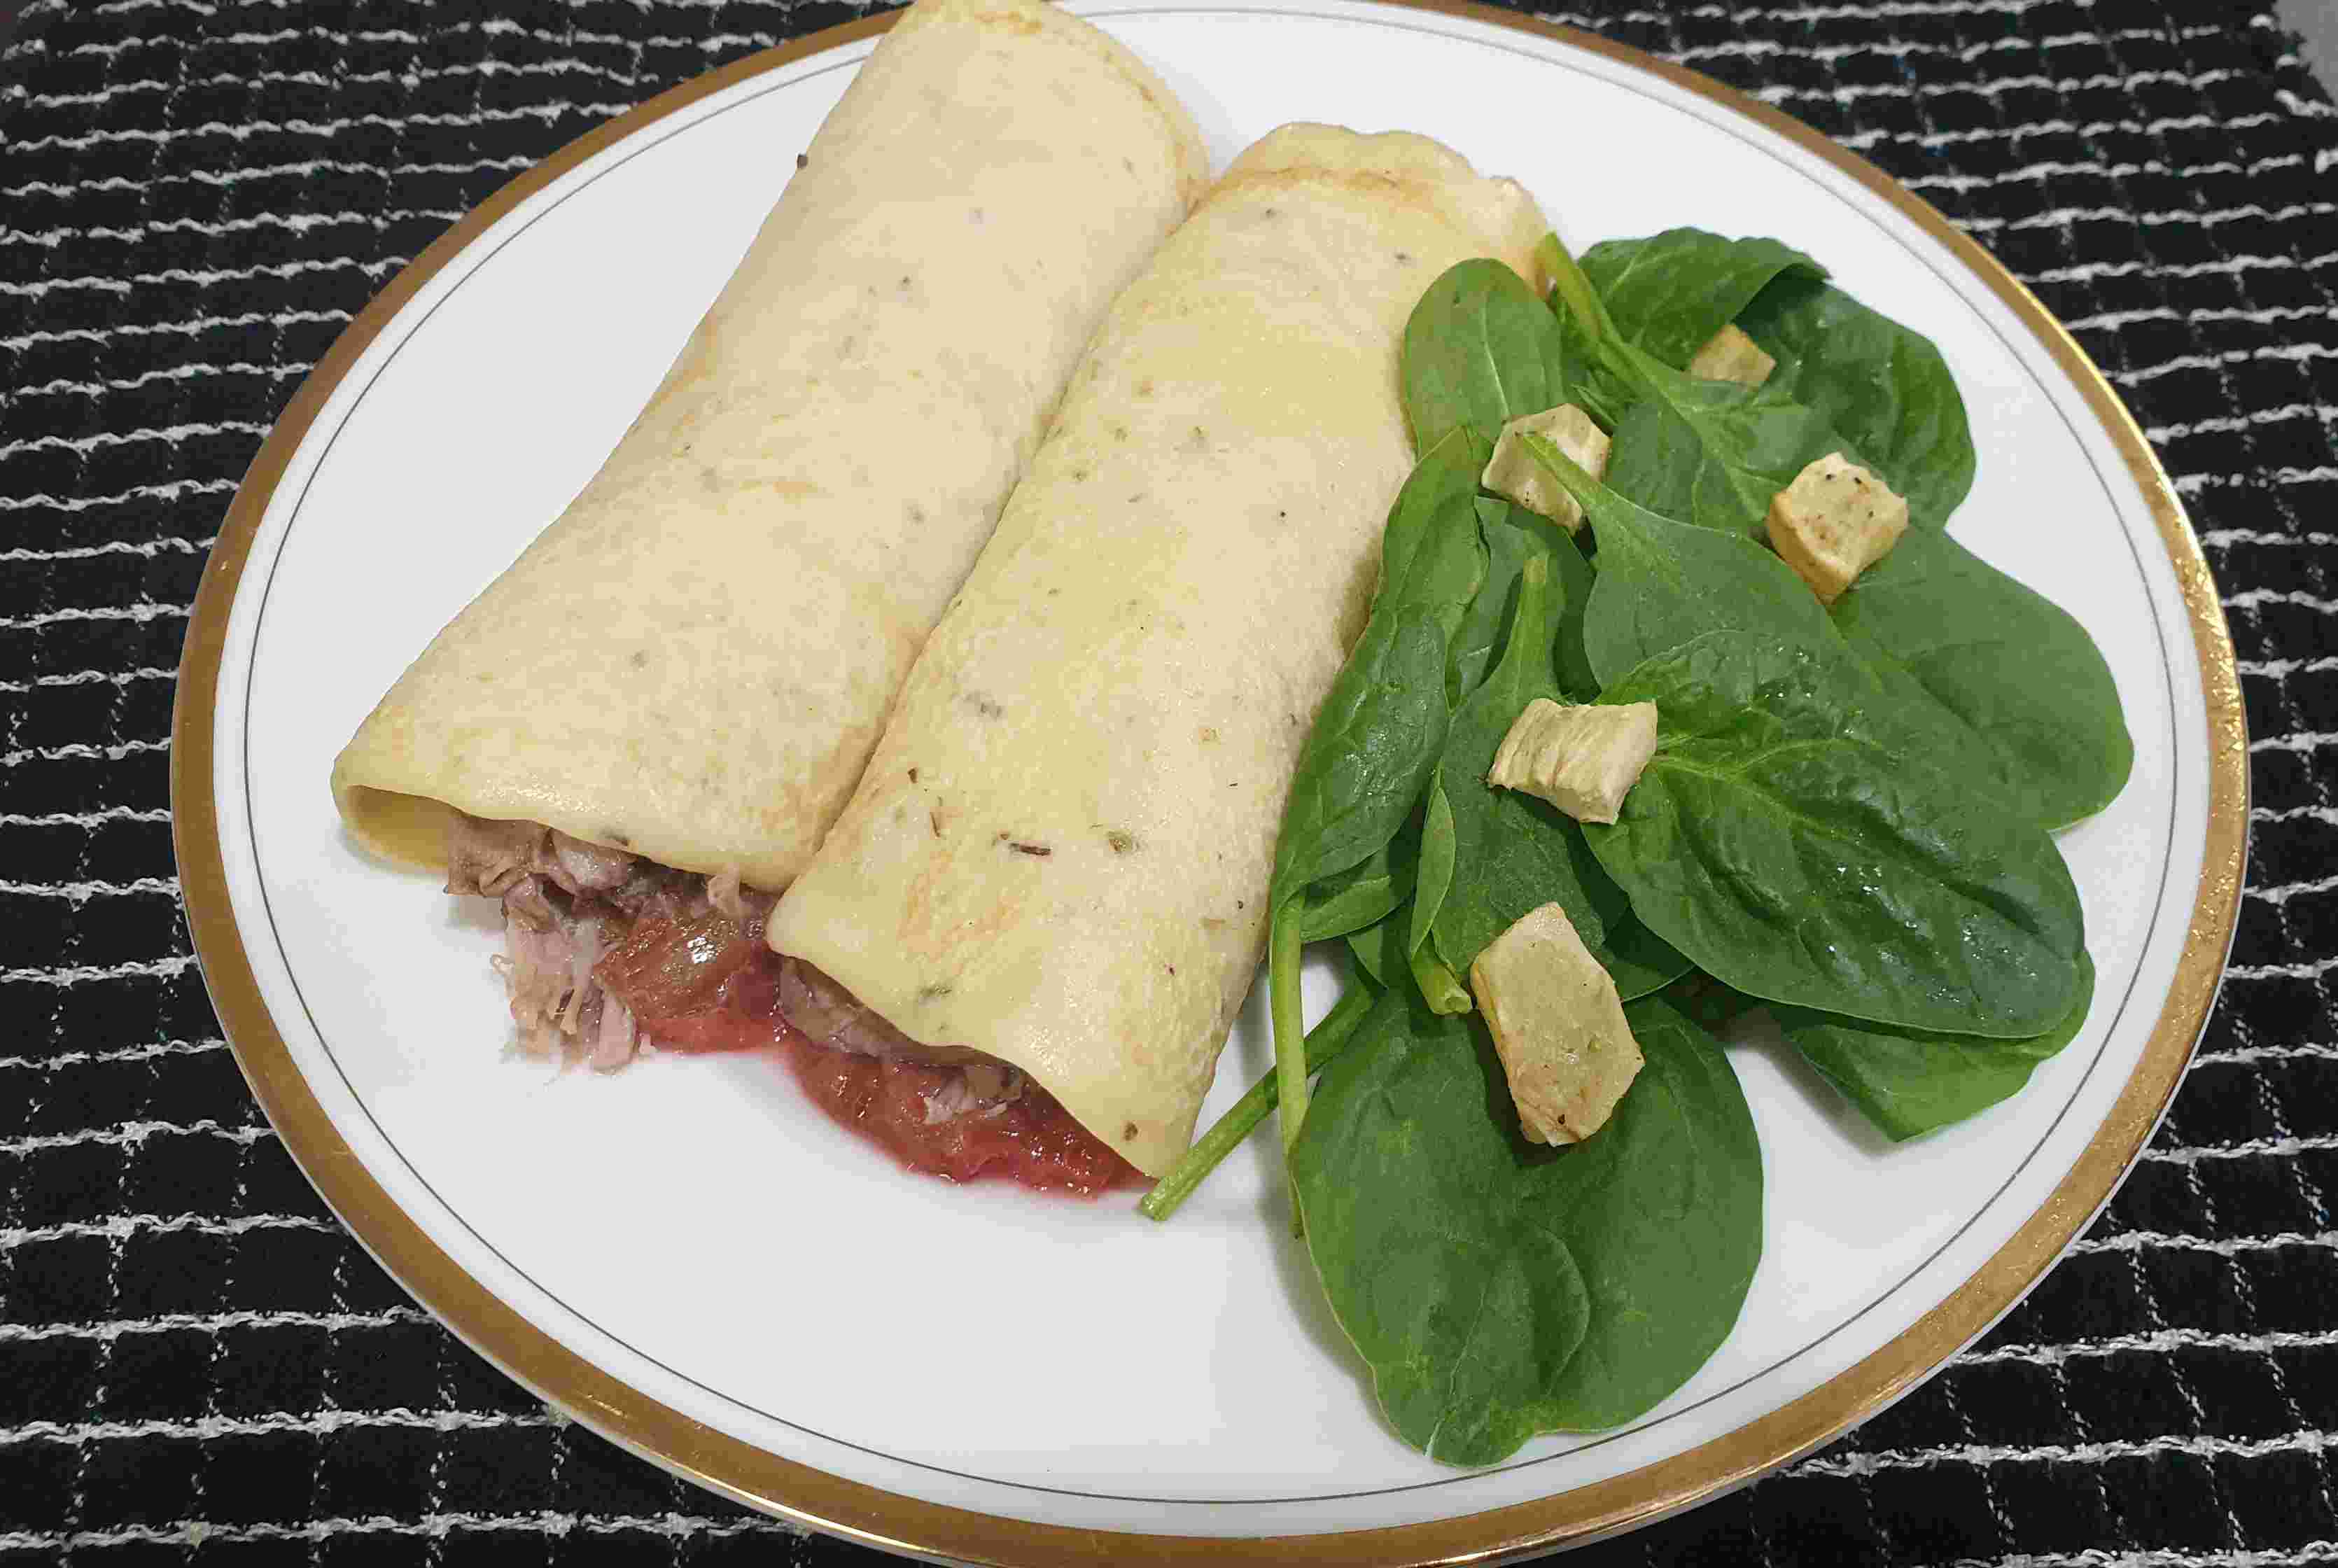 Pulled Pork and Rhubarb Wraps